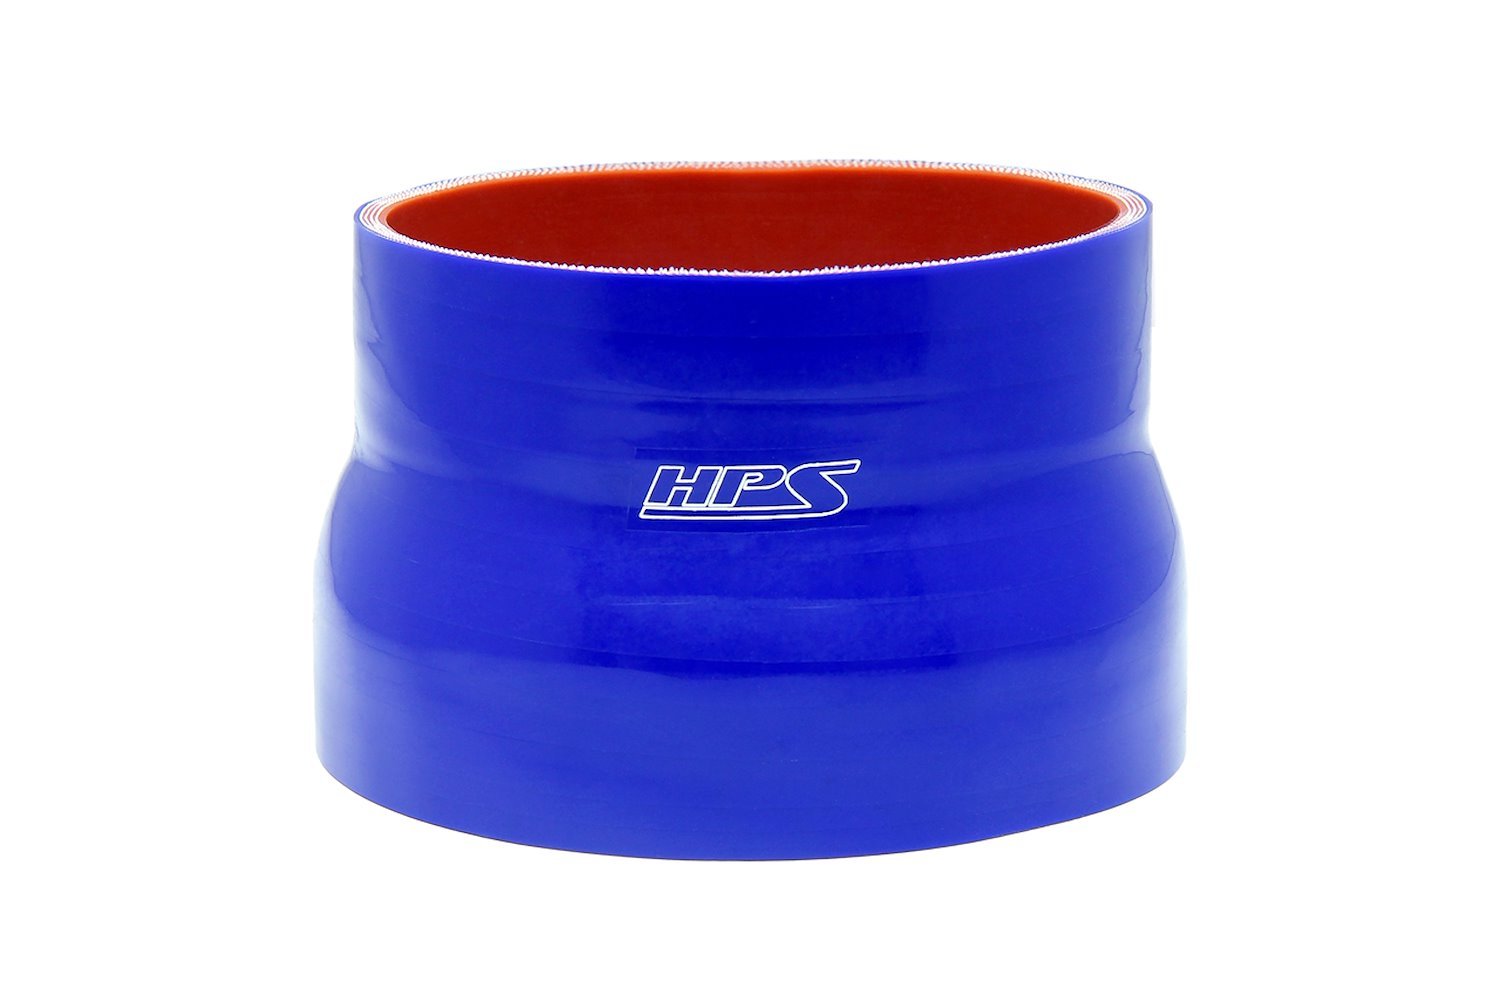 HTSR-400-500-BLUE Silicone Reducer Hose, High-Temp 4-Ply Reinforced, 4 in. - 5 in. ID, 3 in. Long, Blue